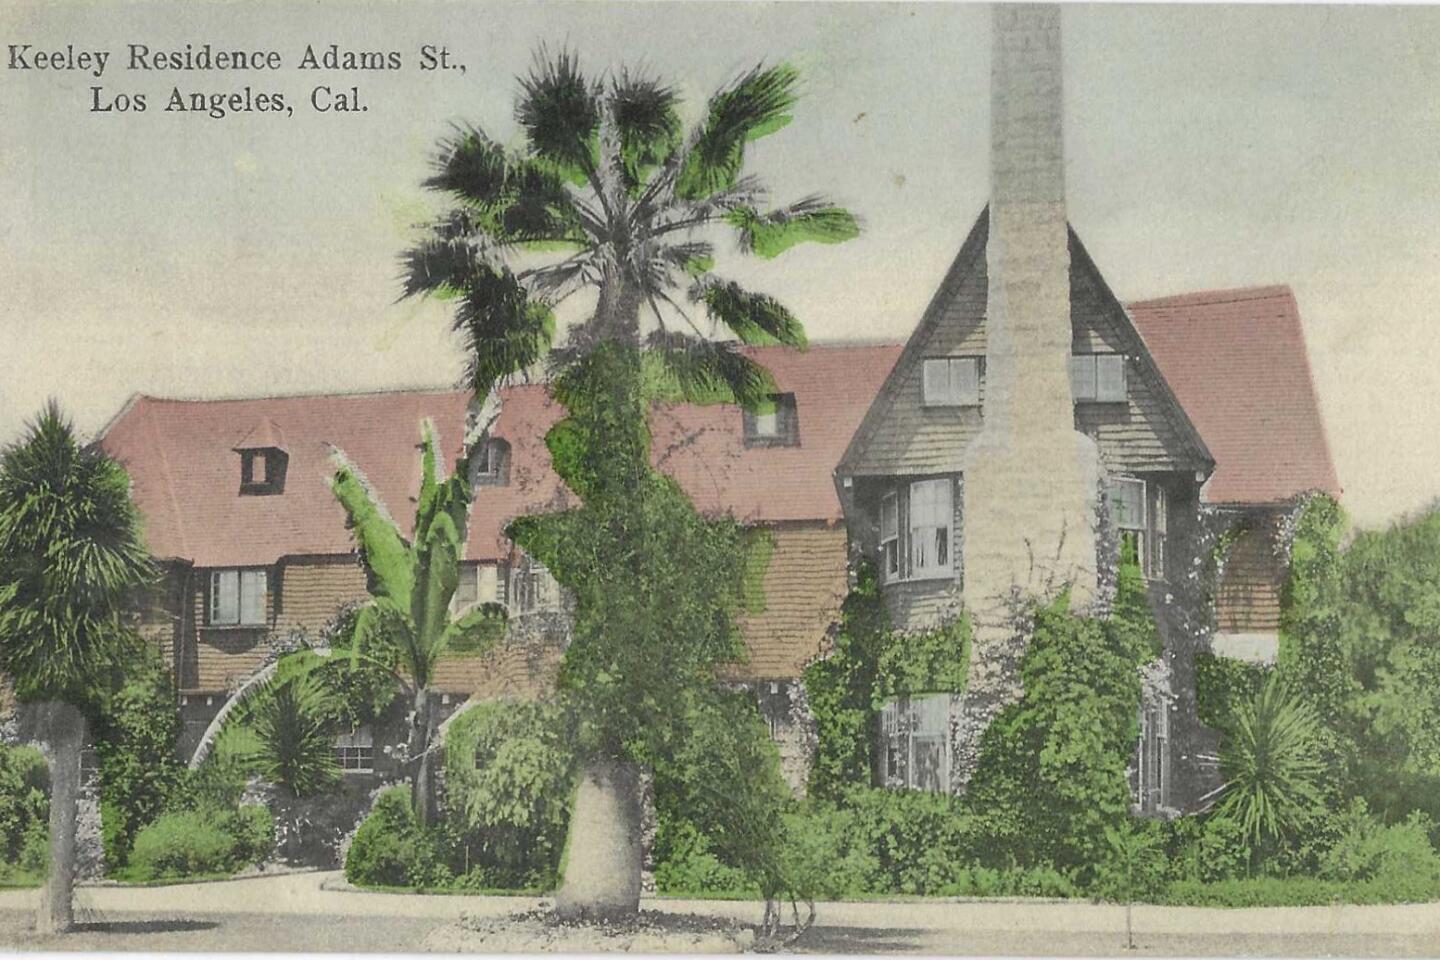 A postcard shows the Keeley residence, with its large chimney and palm trees in the yard, on West Adams Boulevard.